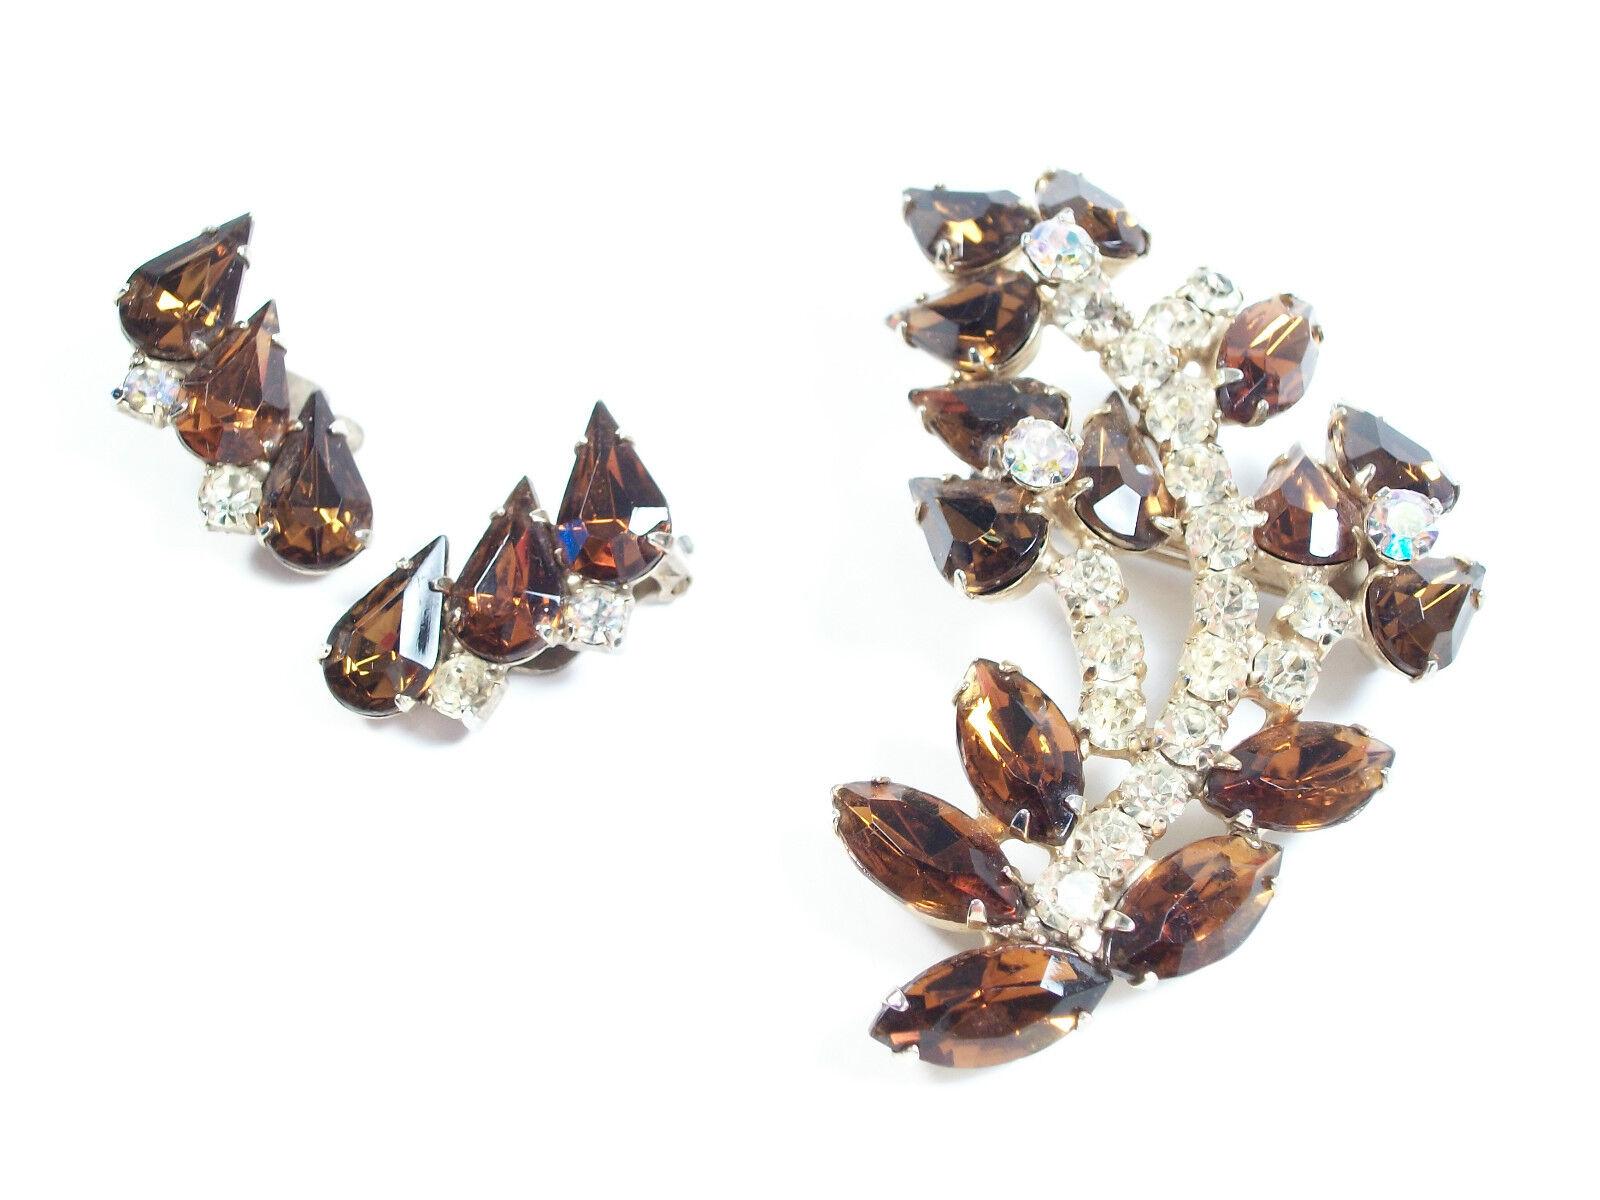 Vintage brooch and earrings demi parure - set with faux topaz and rhinestones - clip on backs to earrings - unsigned - circa 1950's.

Excellent vintage condition - minor signs of wear - one side of the brooch pin/closure is detached and may need